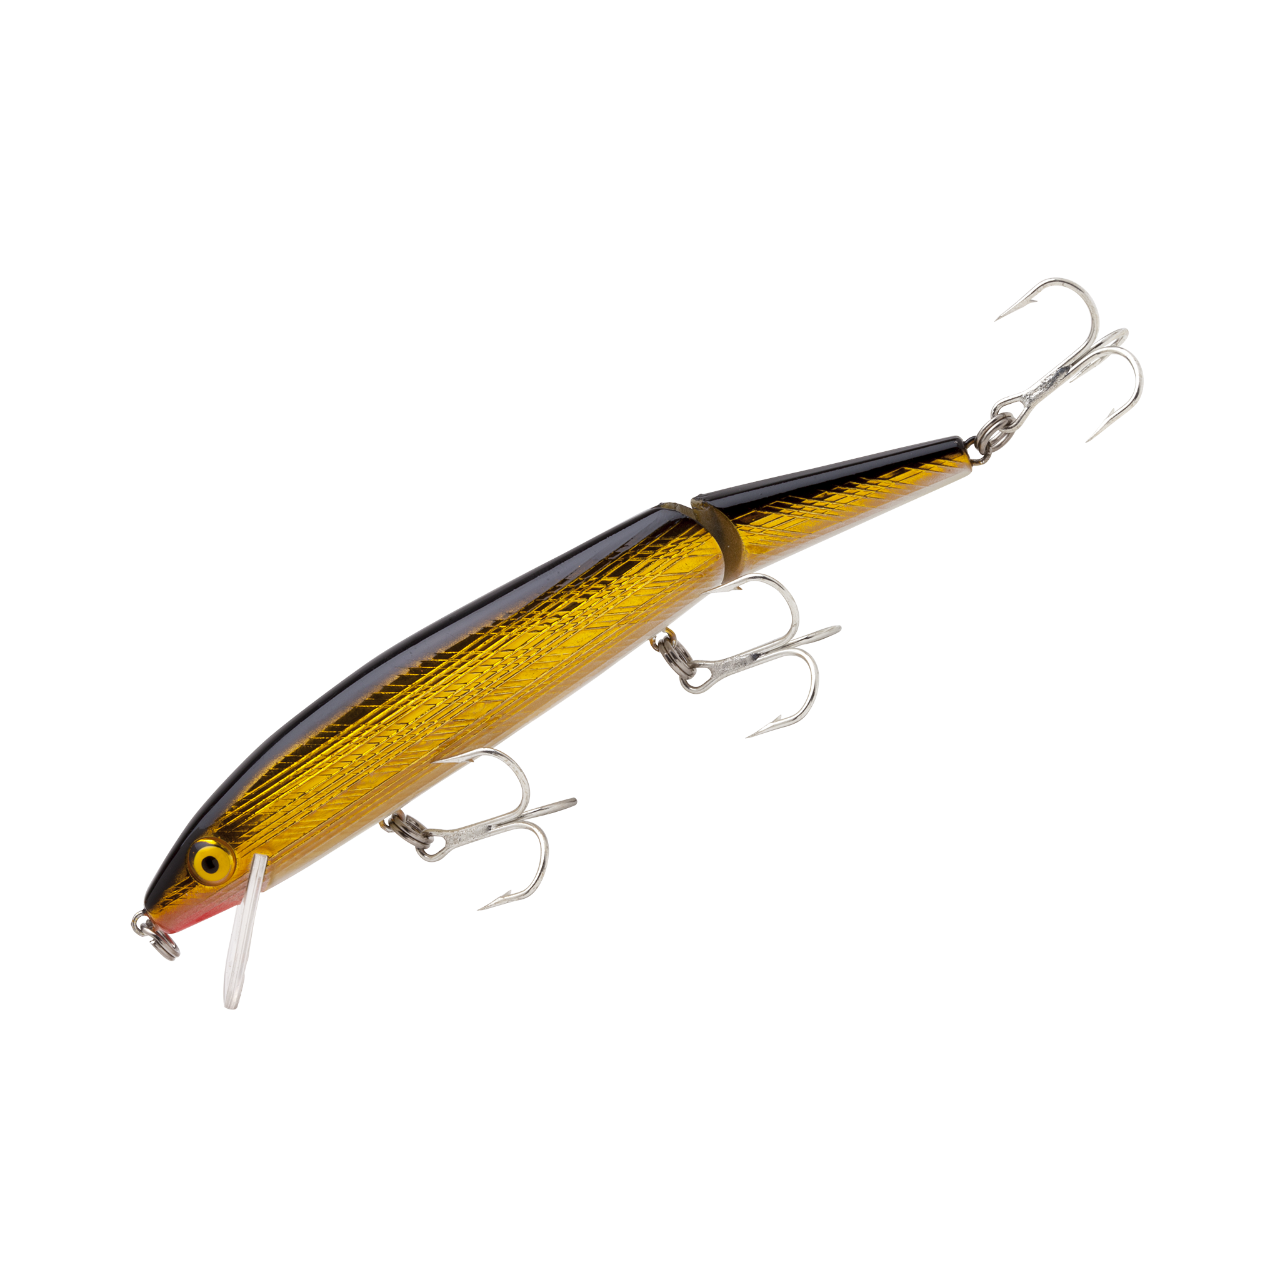  Rebel F49-478V Slick Value Minnow, 1 5/8-Inch 5/64-Ounce, Bass  : Fishing Diving Lures : Sports & Outdoors